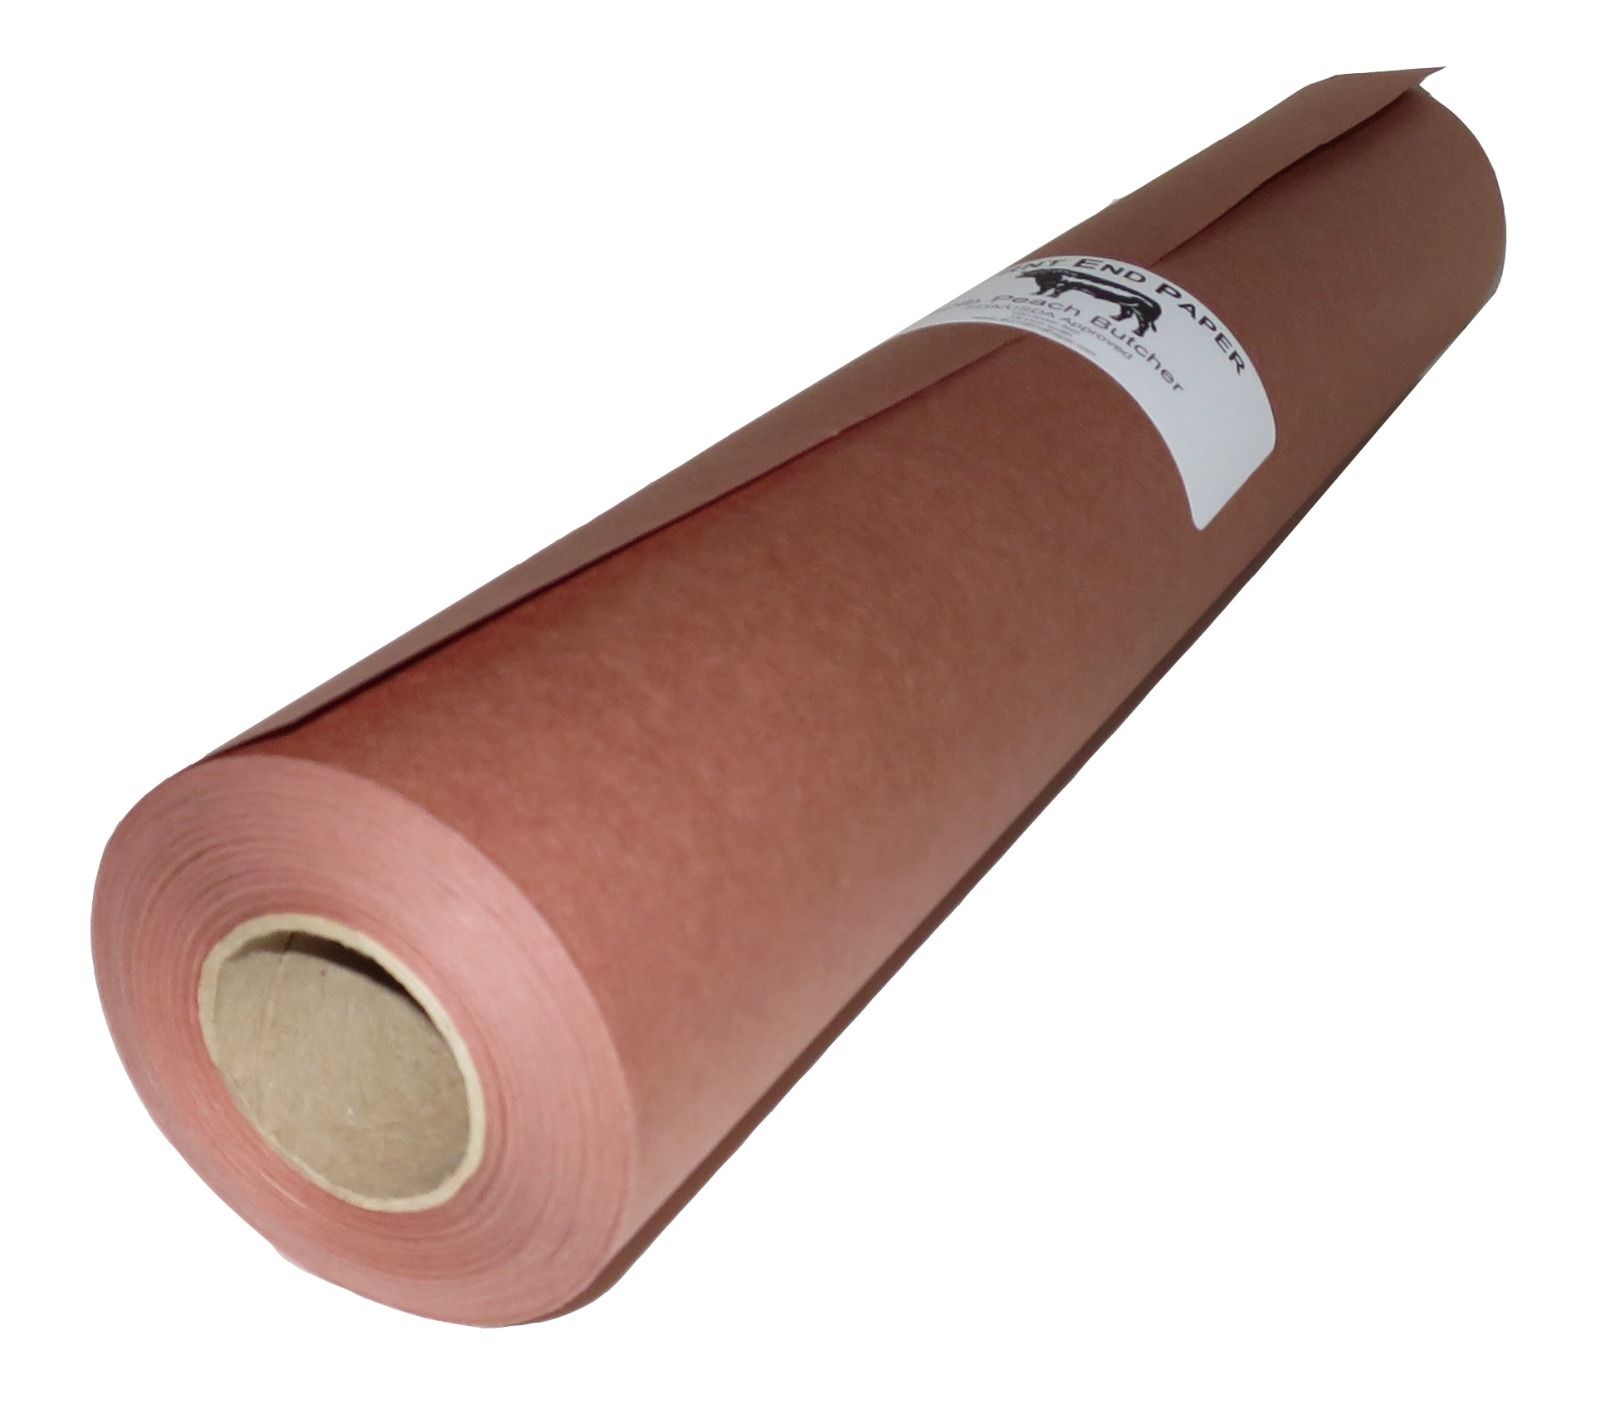 Storing Grilling Pink Craft Butcher Paper In Dispenser Box 17.75 Inch by 175 Feet Roll Kraft Paper Serving Made in USA Heavy Duty wrapping For BBQ Smoking All Meats No Bleach Unwaxed 